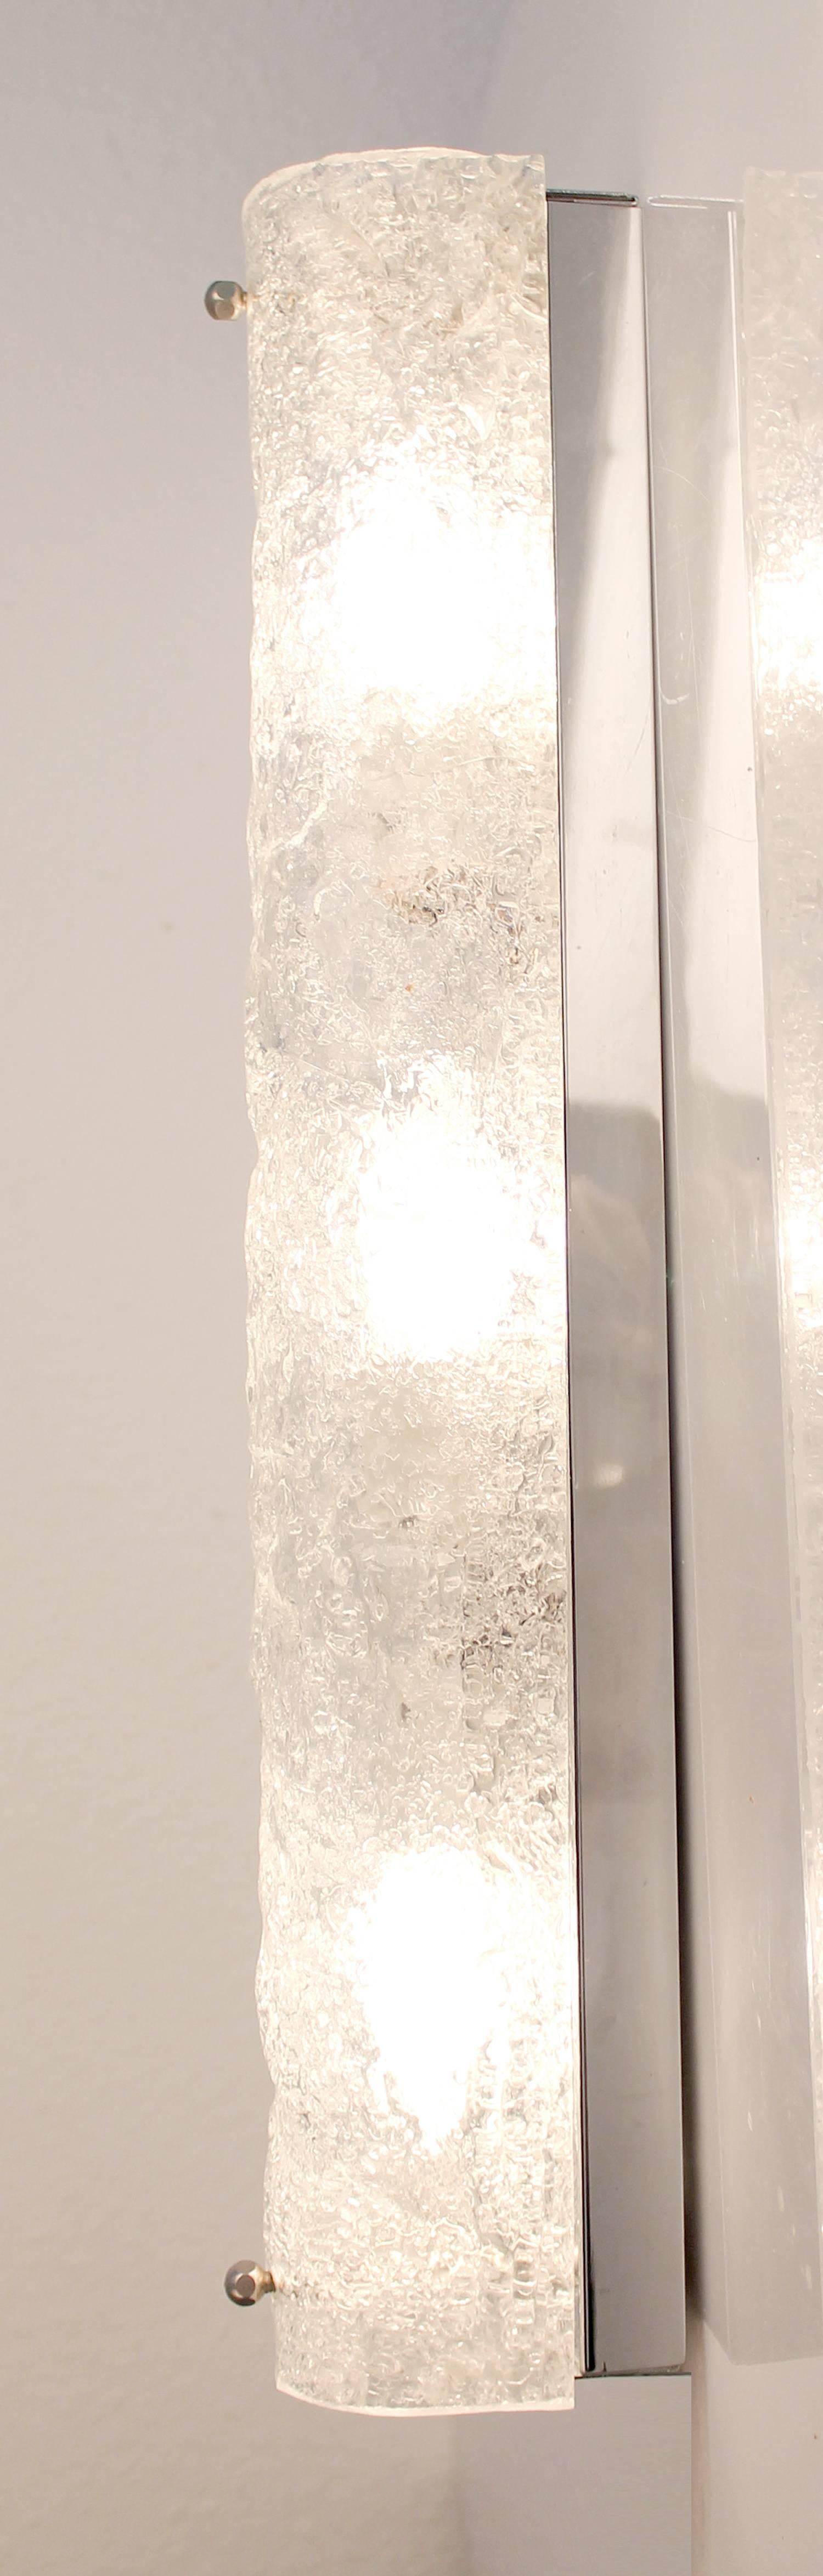 German Pair of Large Murano Vanity Glass Sconces, 1960s Chrome Mirror Wall Lights